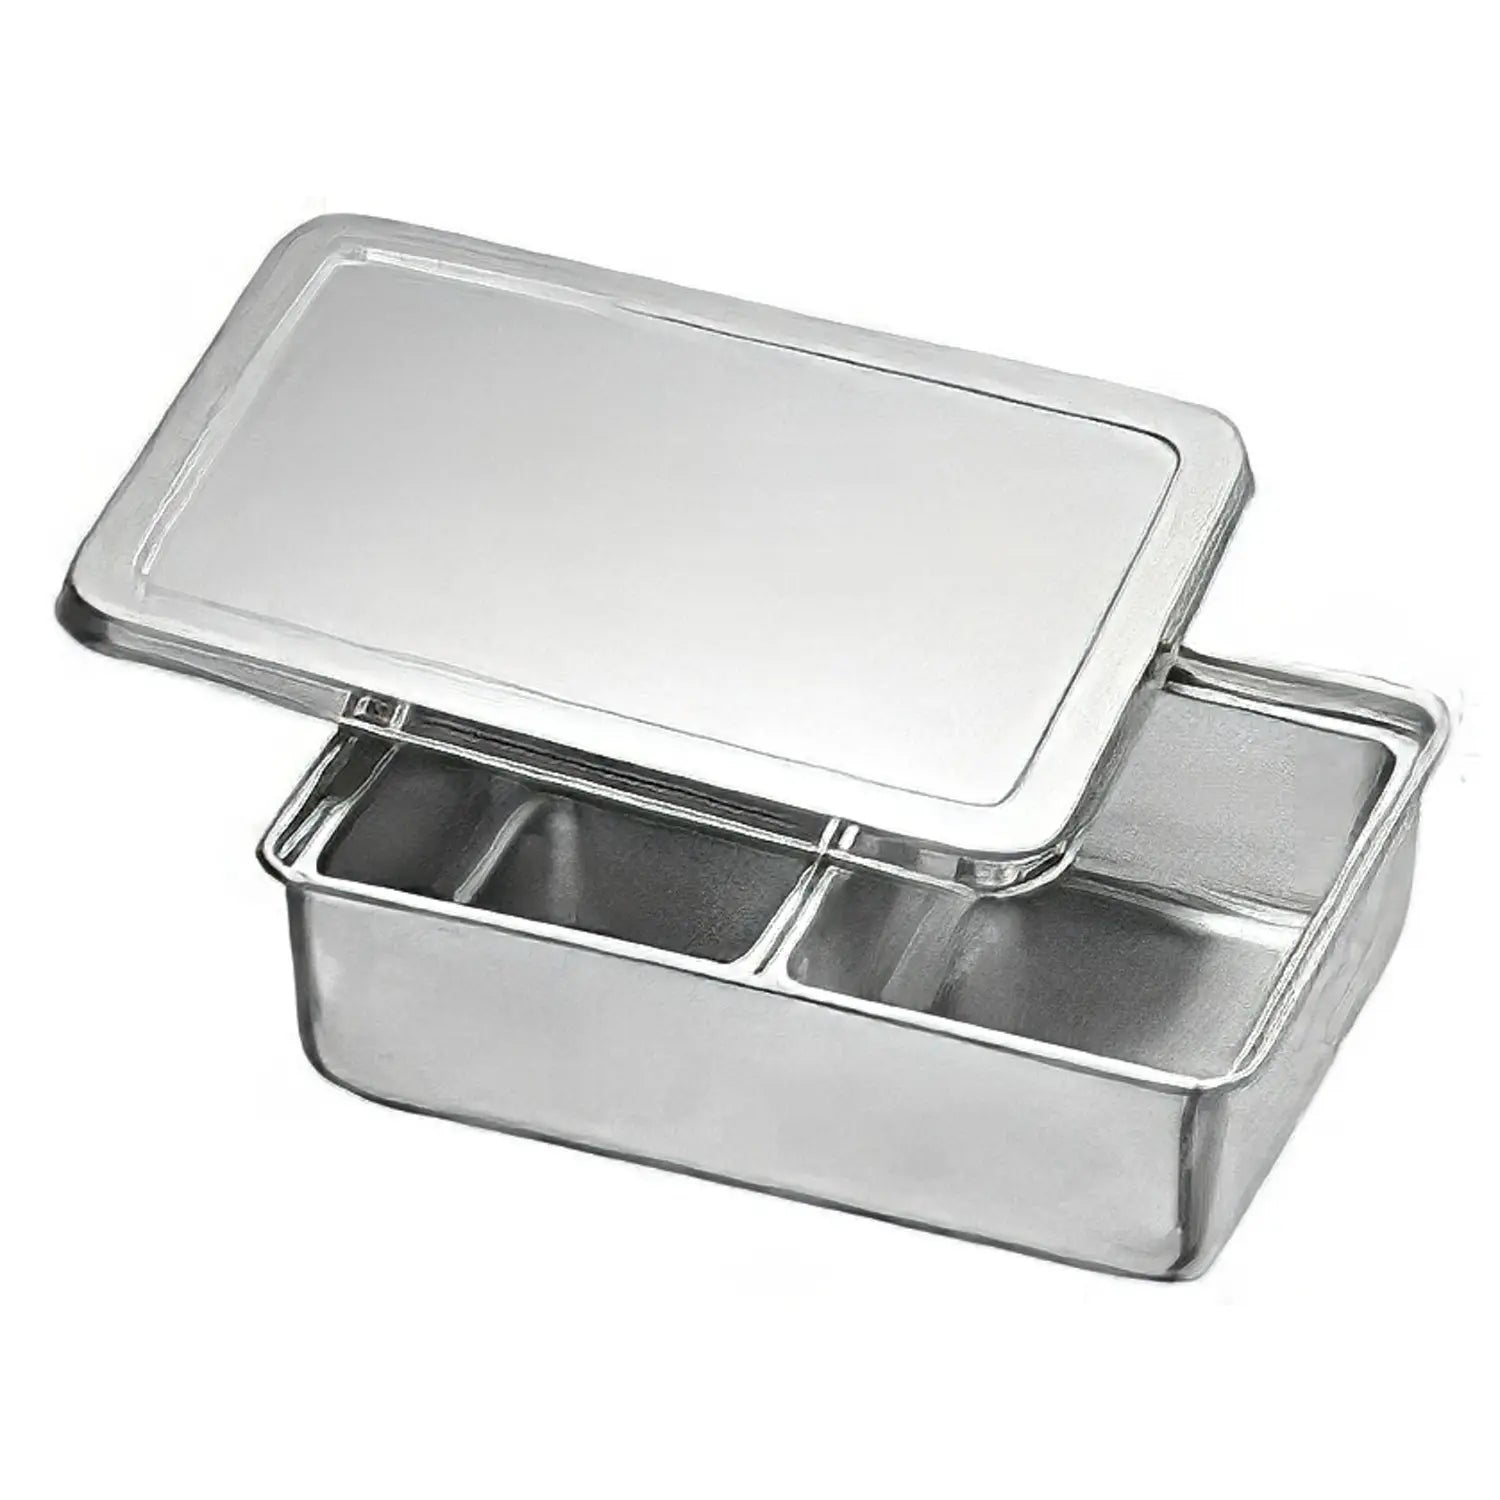 Stainless Yakumi Pan Seasoning Container w/3 Compartments Silver Arrow Japan